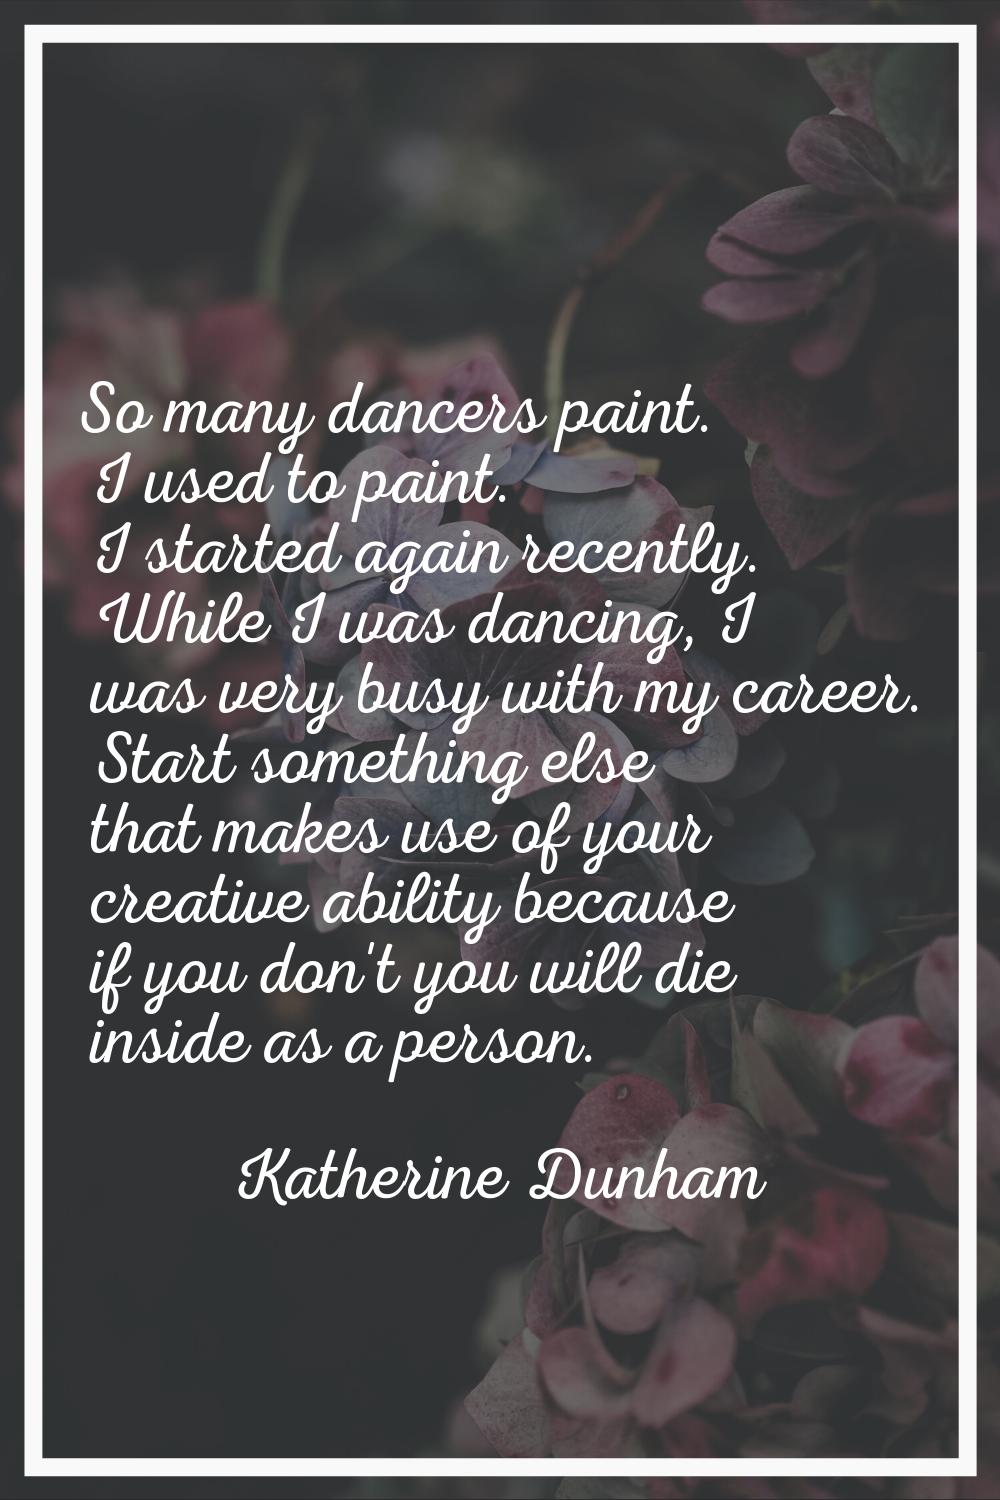 So many dancers paint. I used to paint. I started again recently. While I was dancing, I was very b